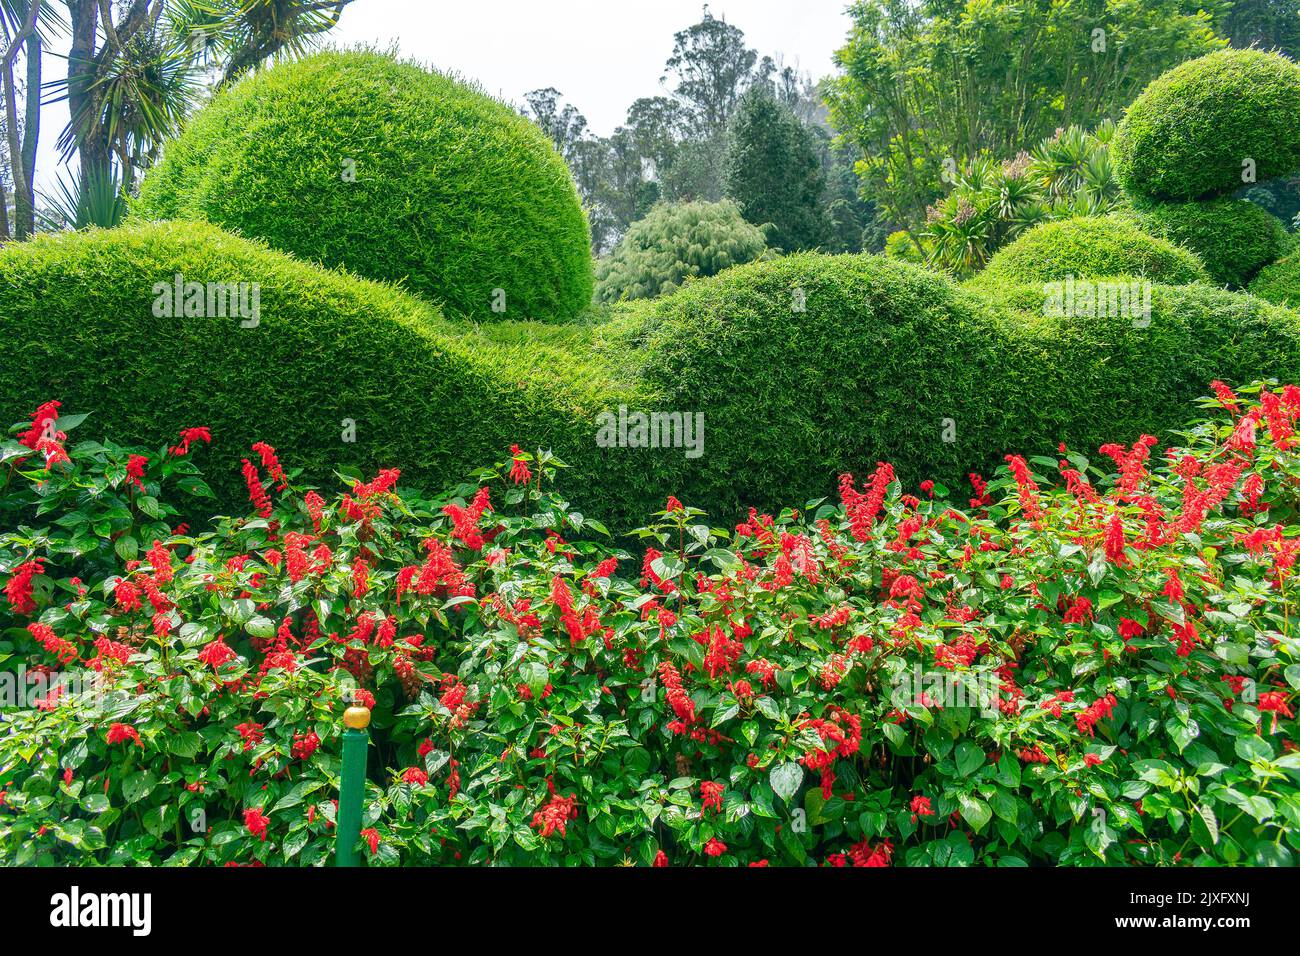 rounds shaped created from bushes with in front of some flowers Stock Photo